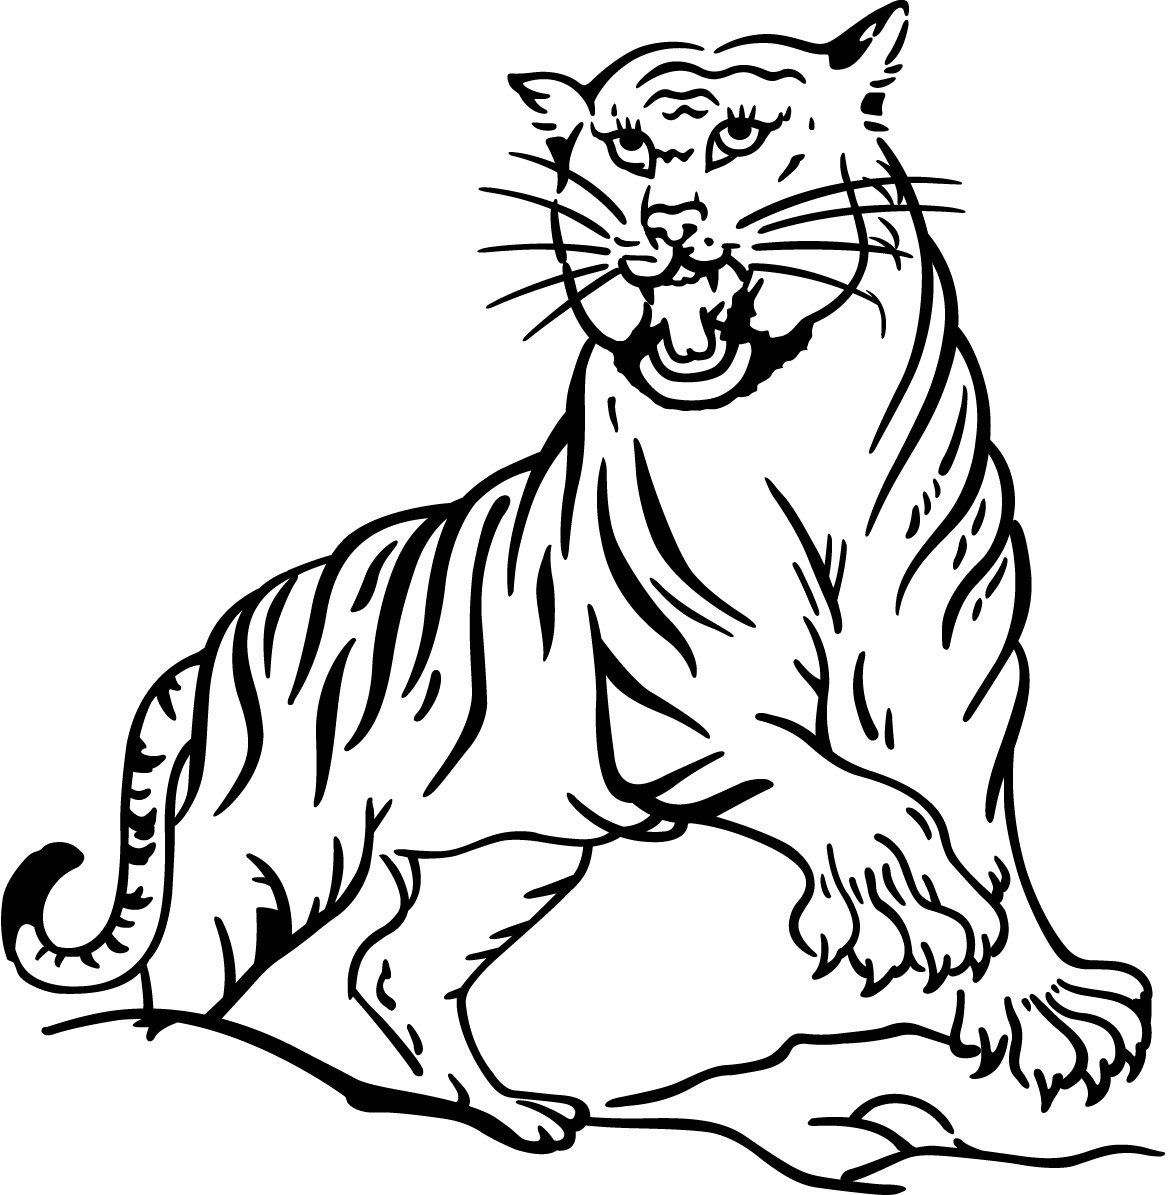 Preschool Coloring Pages (24) - Coloring Kids